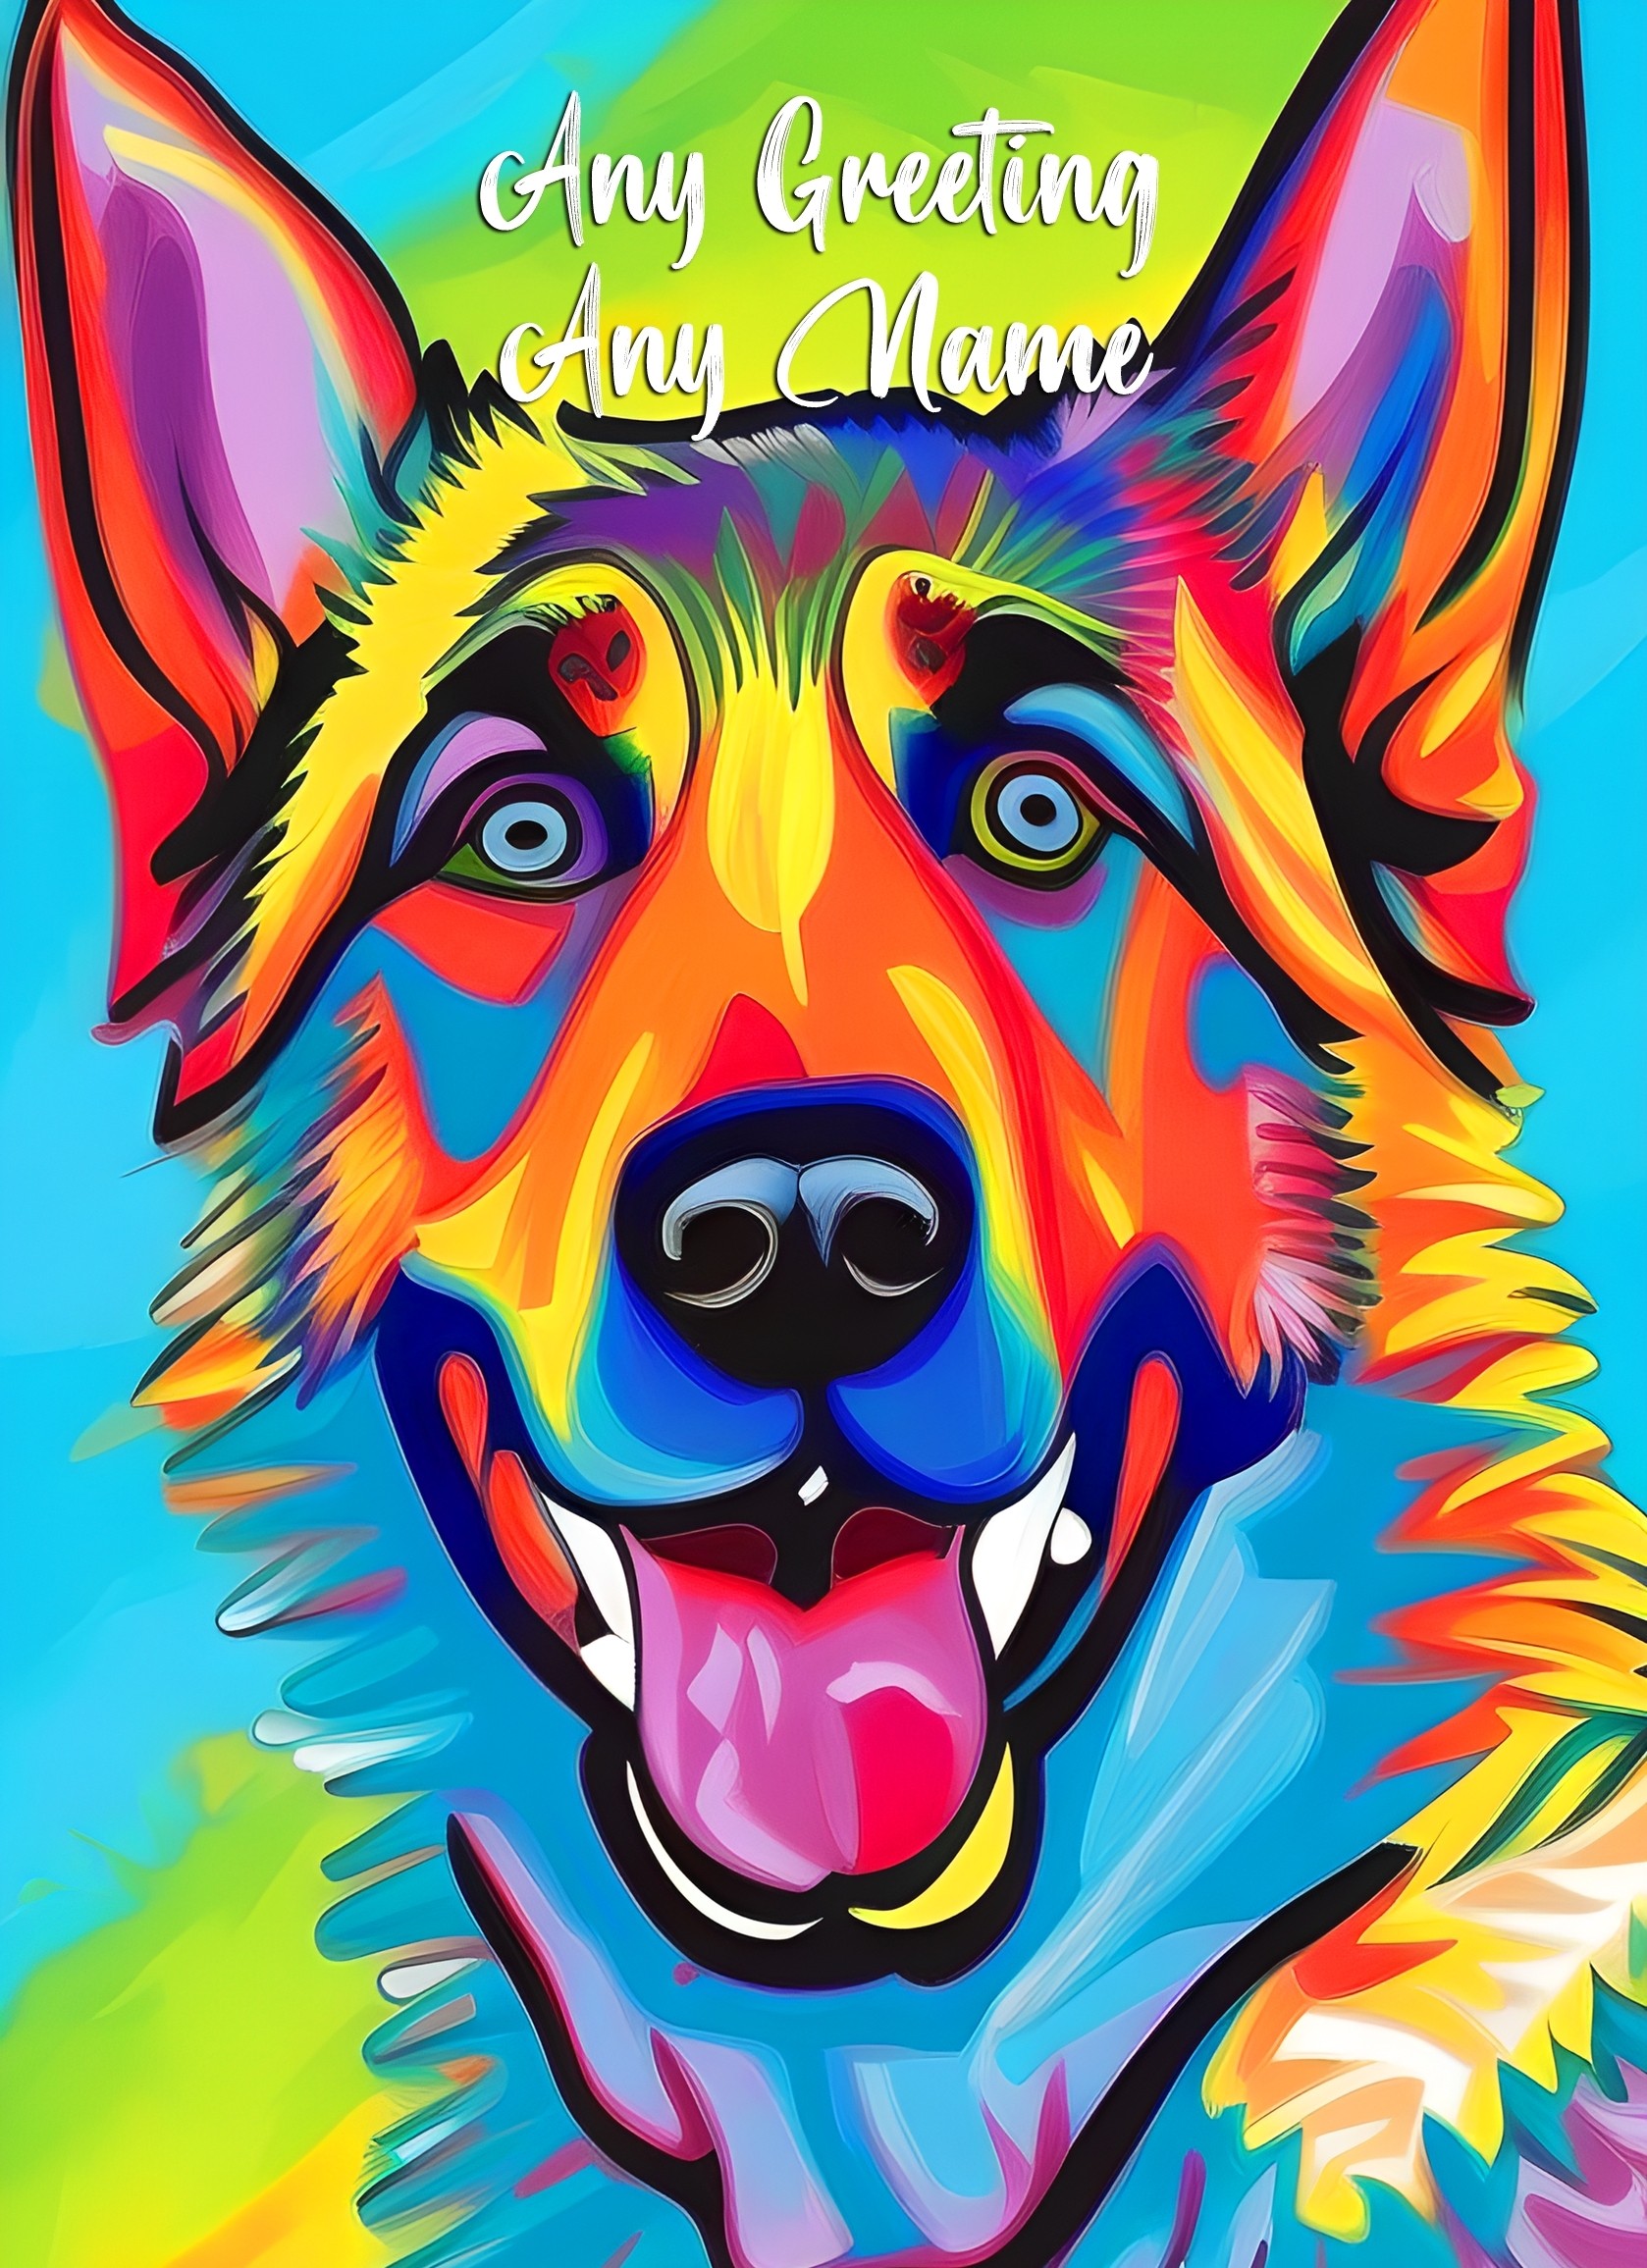 Personalised German Shepherd Dog Colourful Abstract Art Blank Greeting Card (Birthday, Fathers Day, Any Occasion)